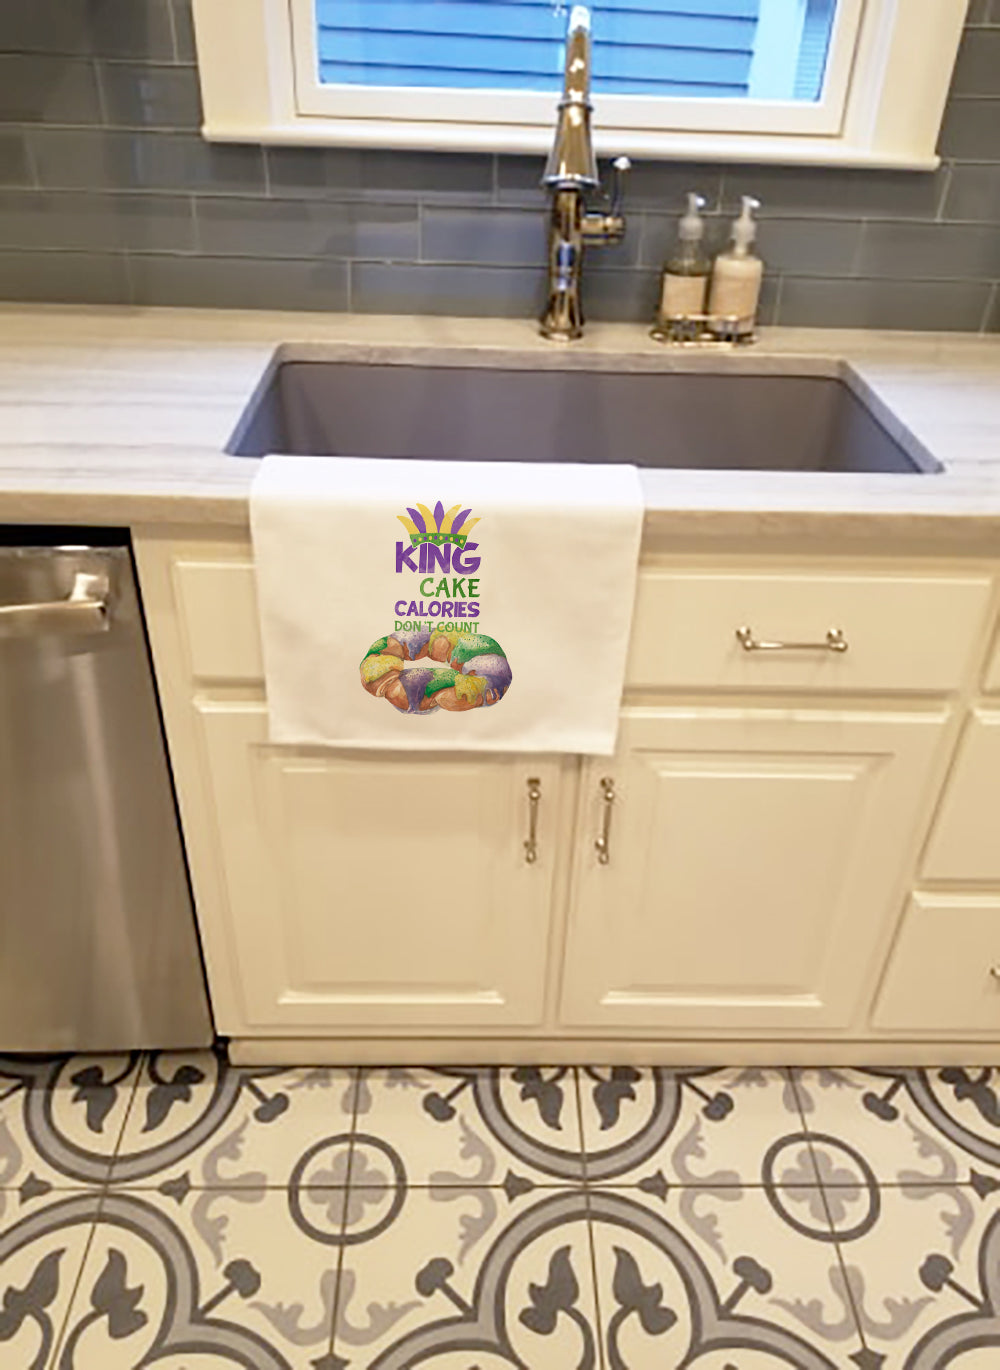 King Cake Calories Don't Count Mardi Gras White Kitchen Towel Set of 2 Dish Towels - the-store.com